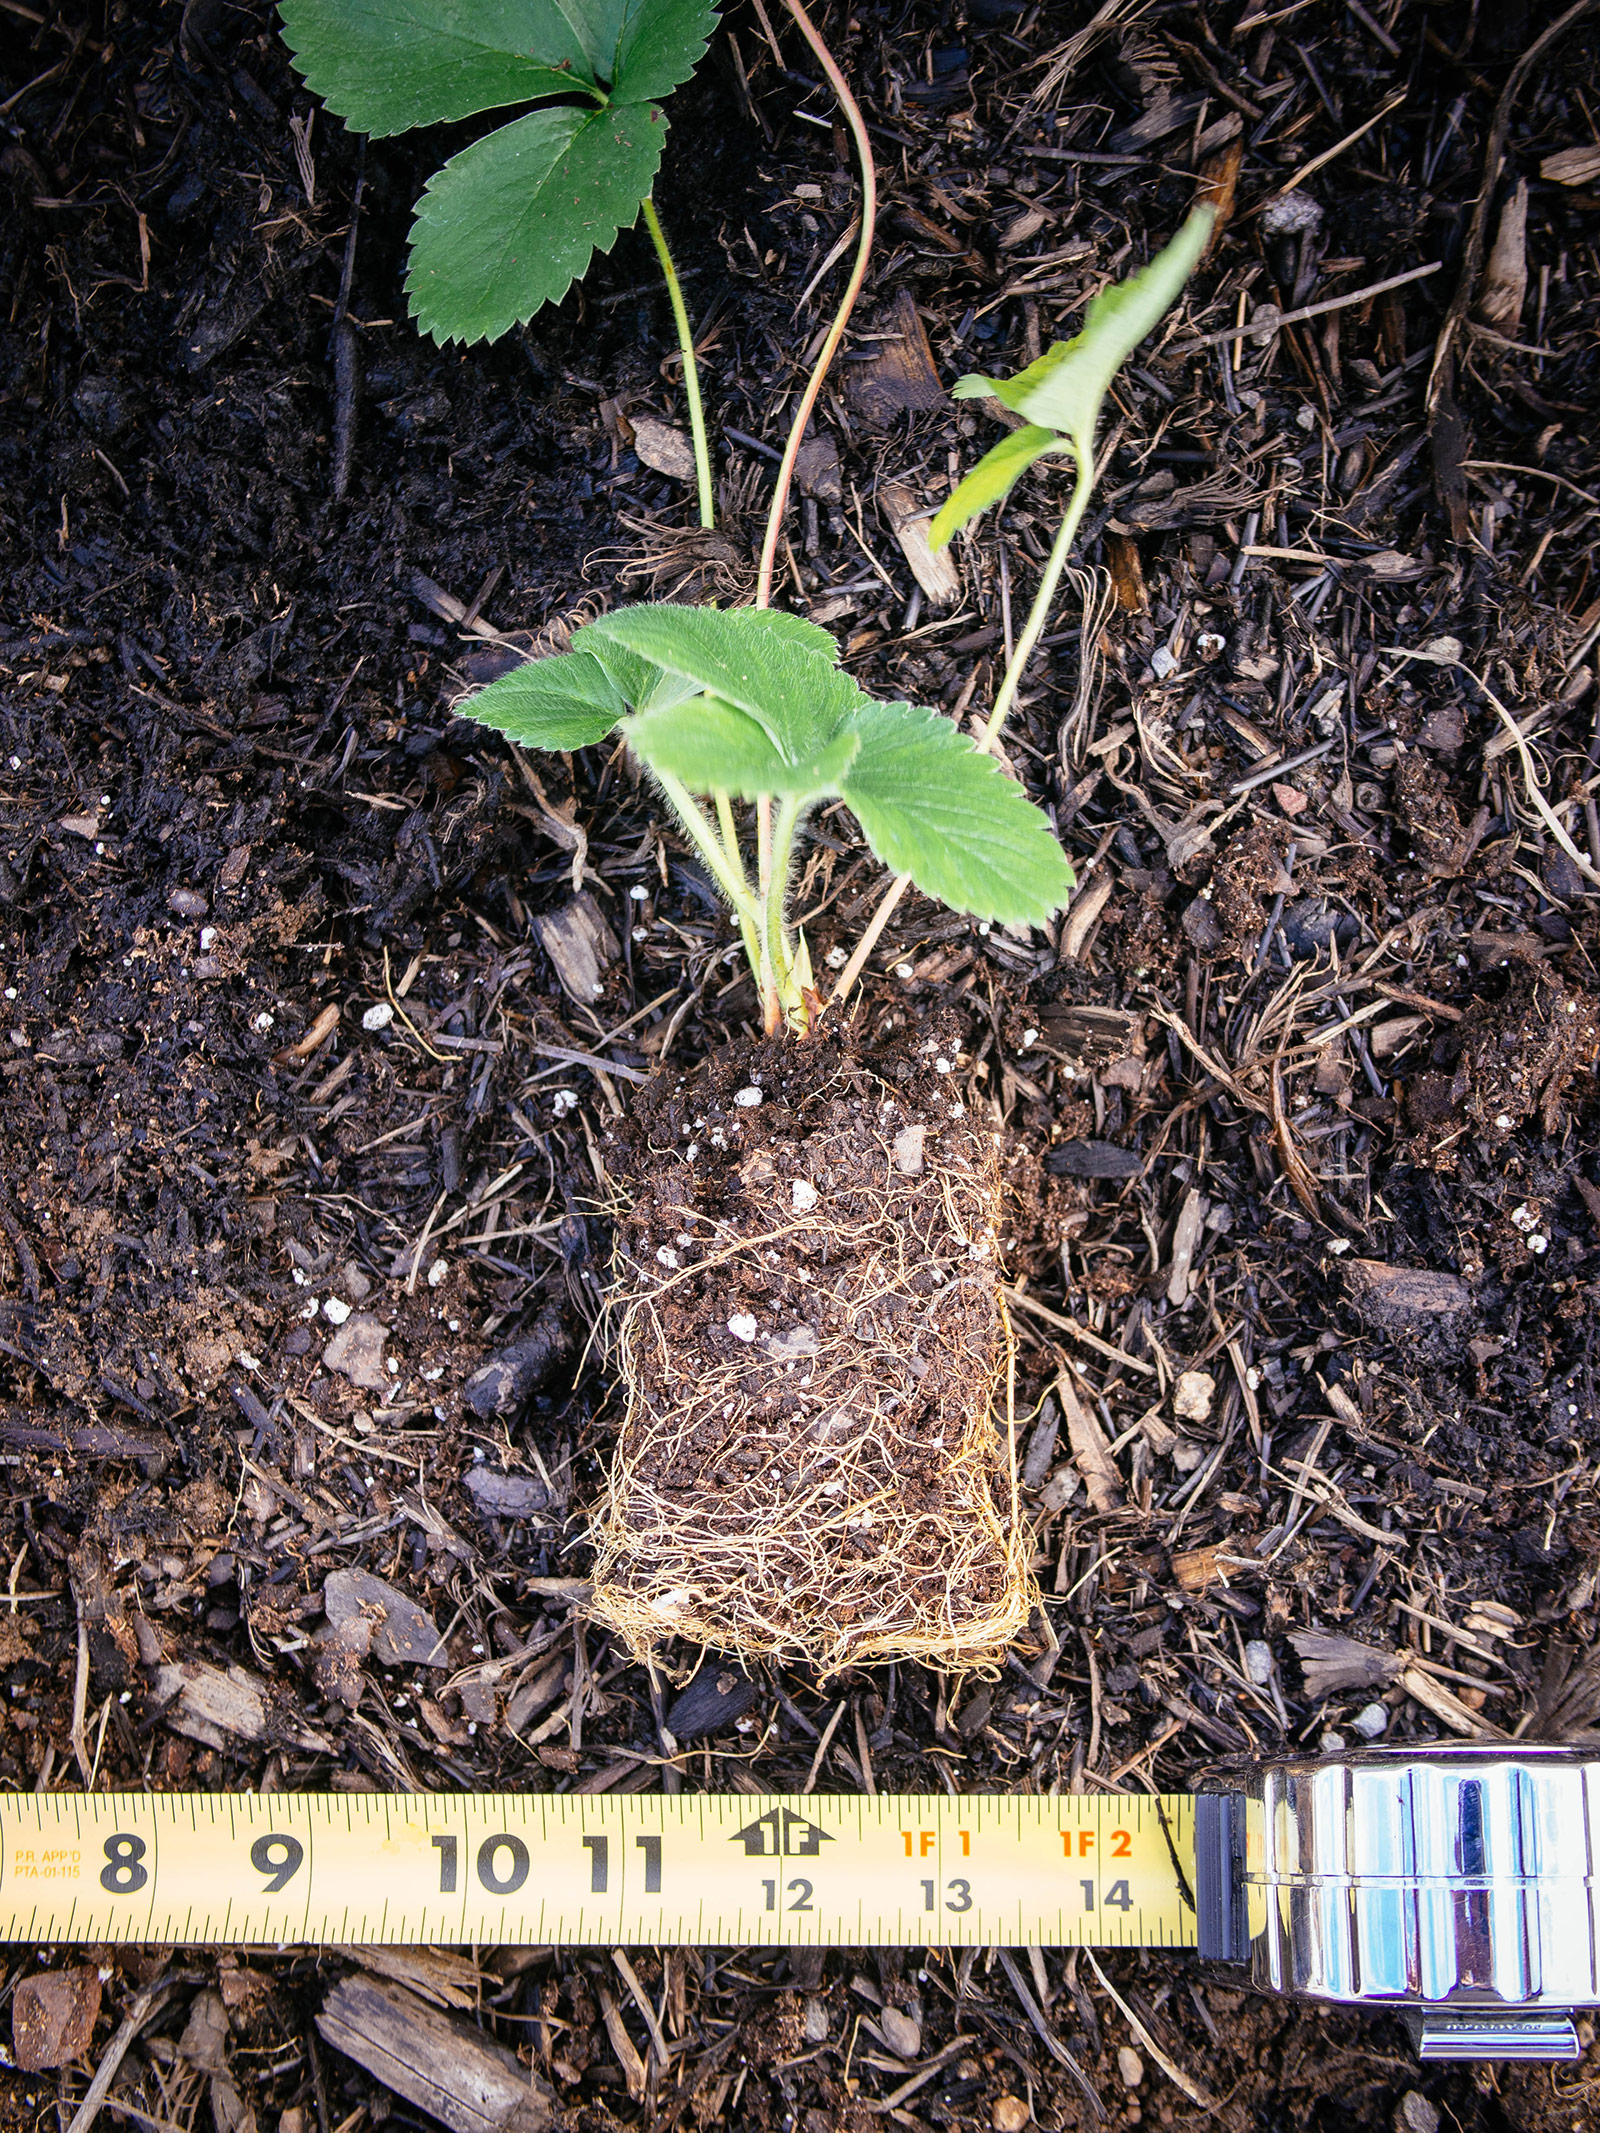 Strawberry seedling placed on the soil with a yellow tape measure underneath it